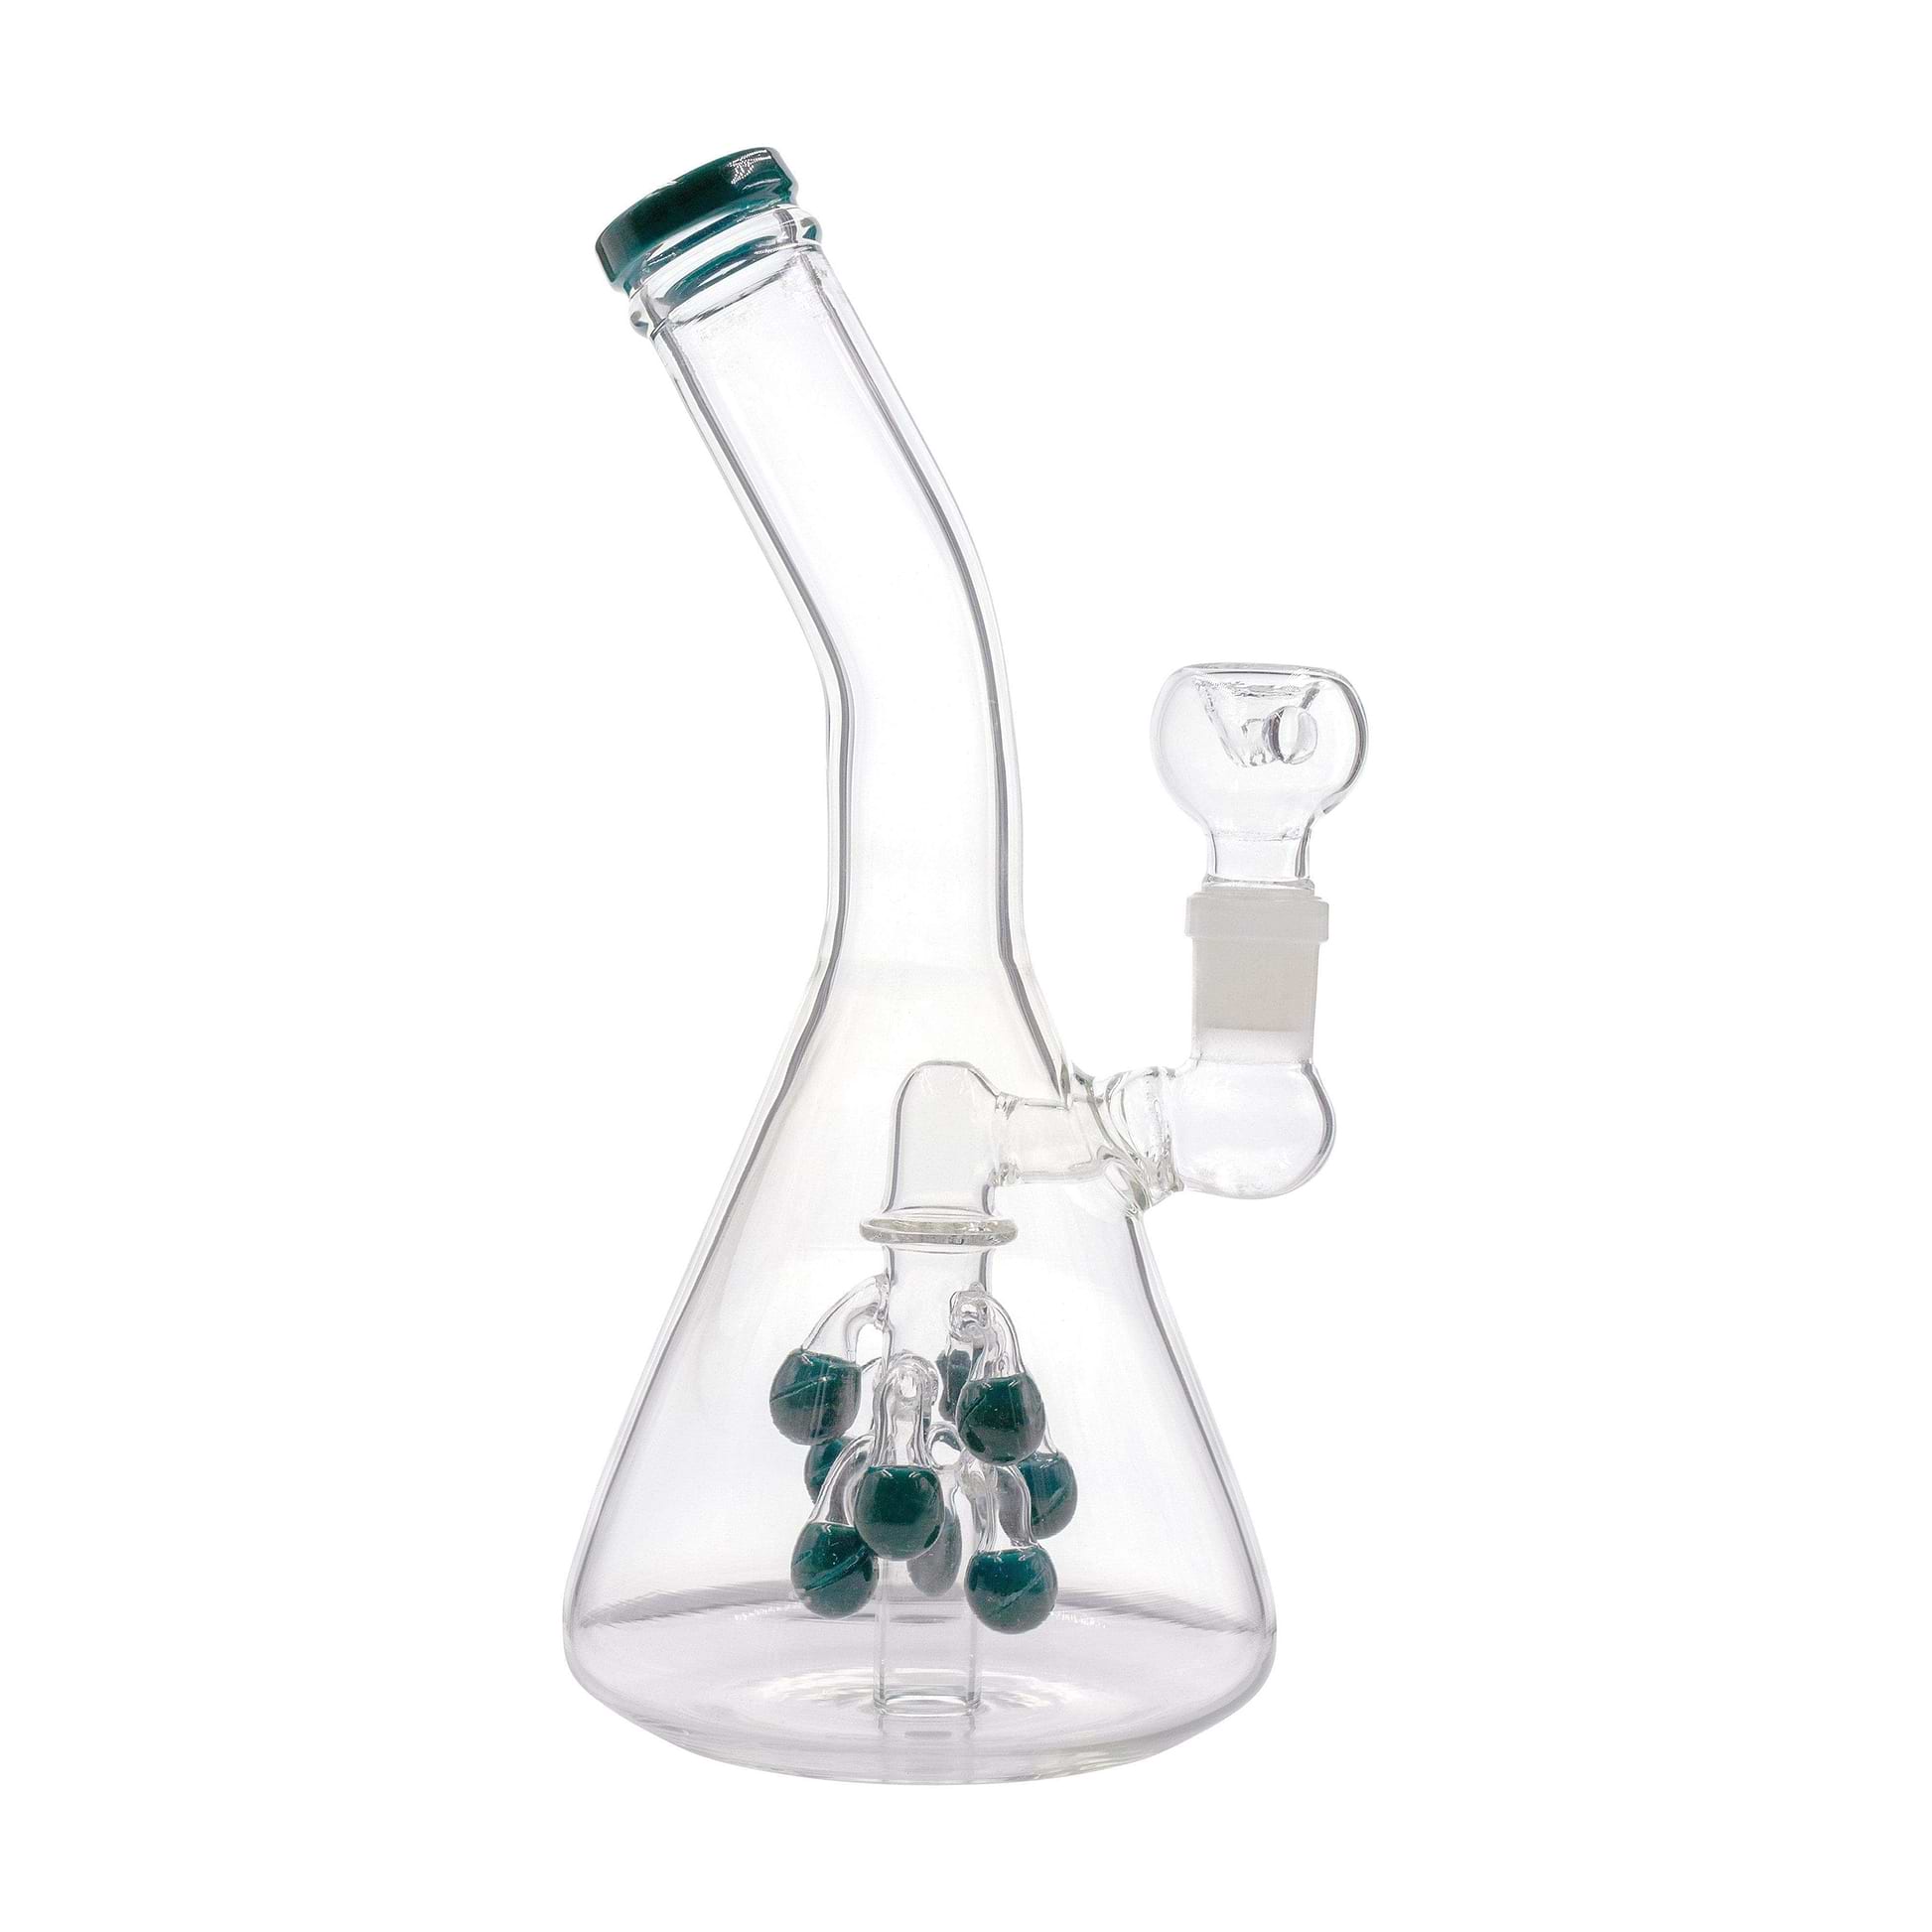 10-inch glass bong smoking device bent neck with 8 bulbs seeded percolator with splashguard bent neck